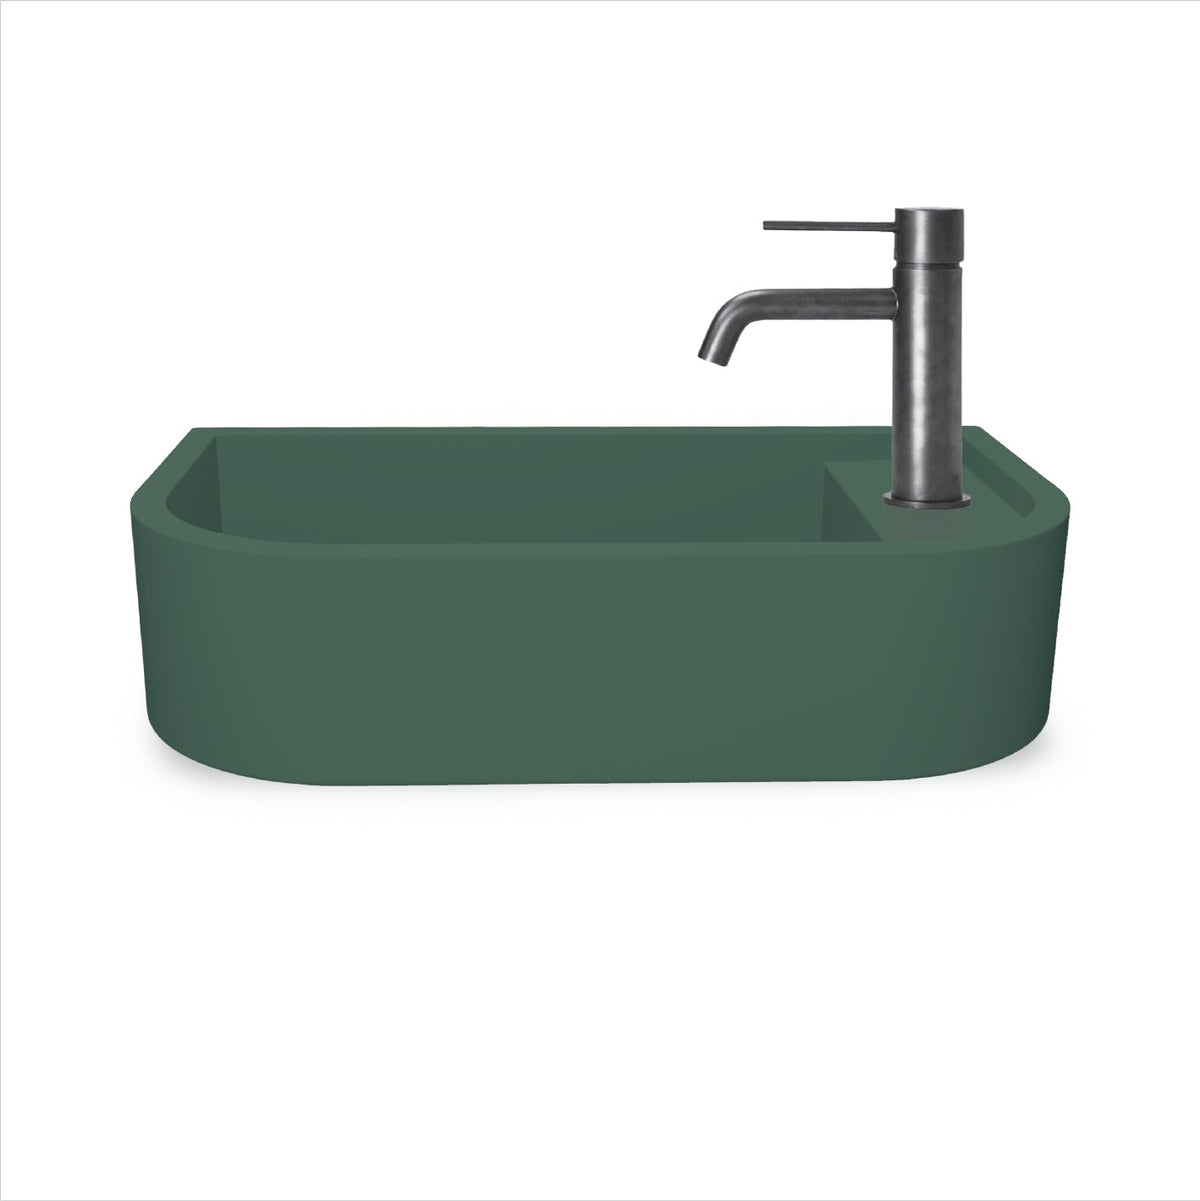 Loop 02 Basin - Overflow - Surface Mount (Teal,Tap Hole,Chrome)